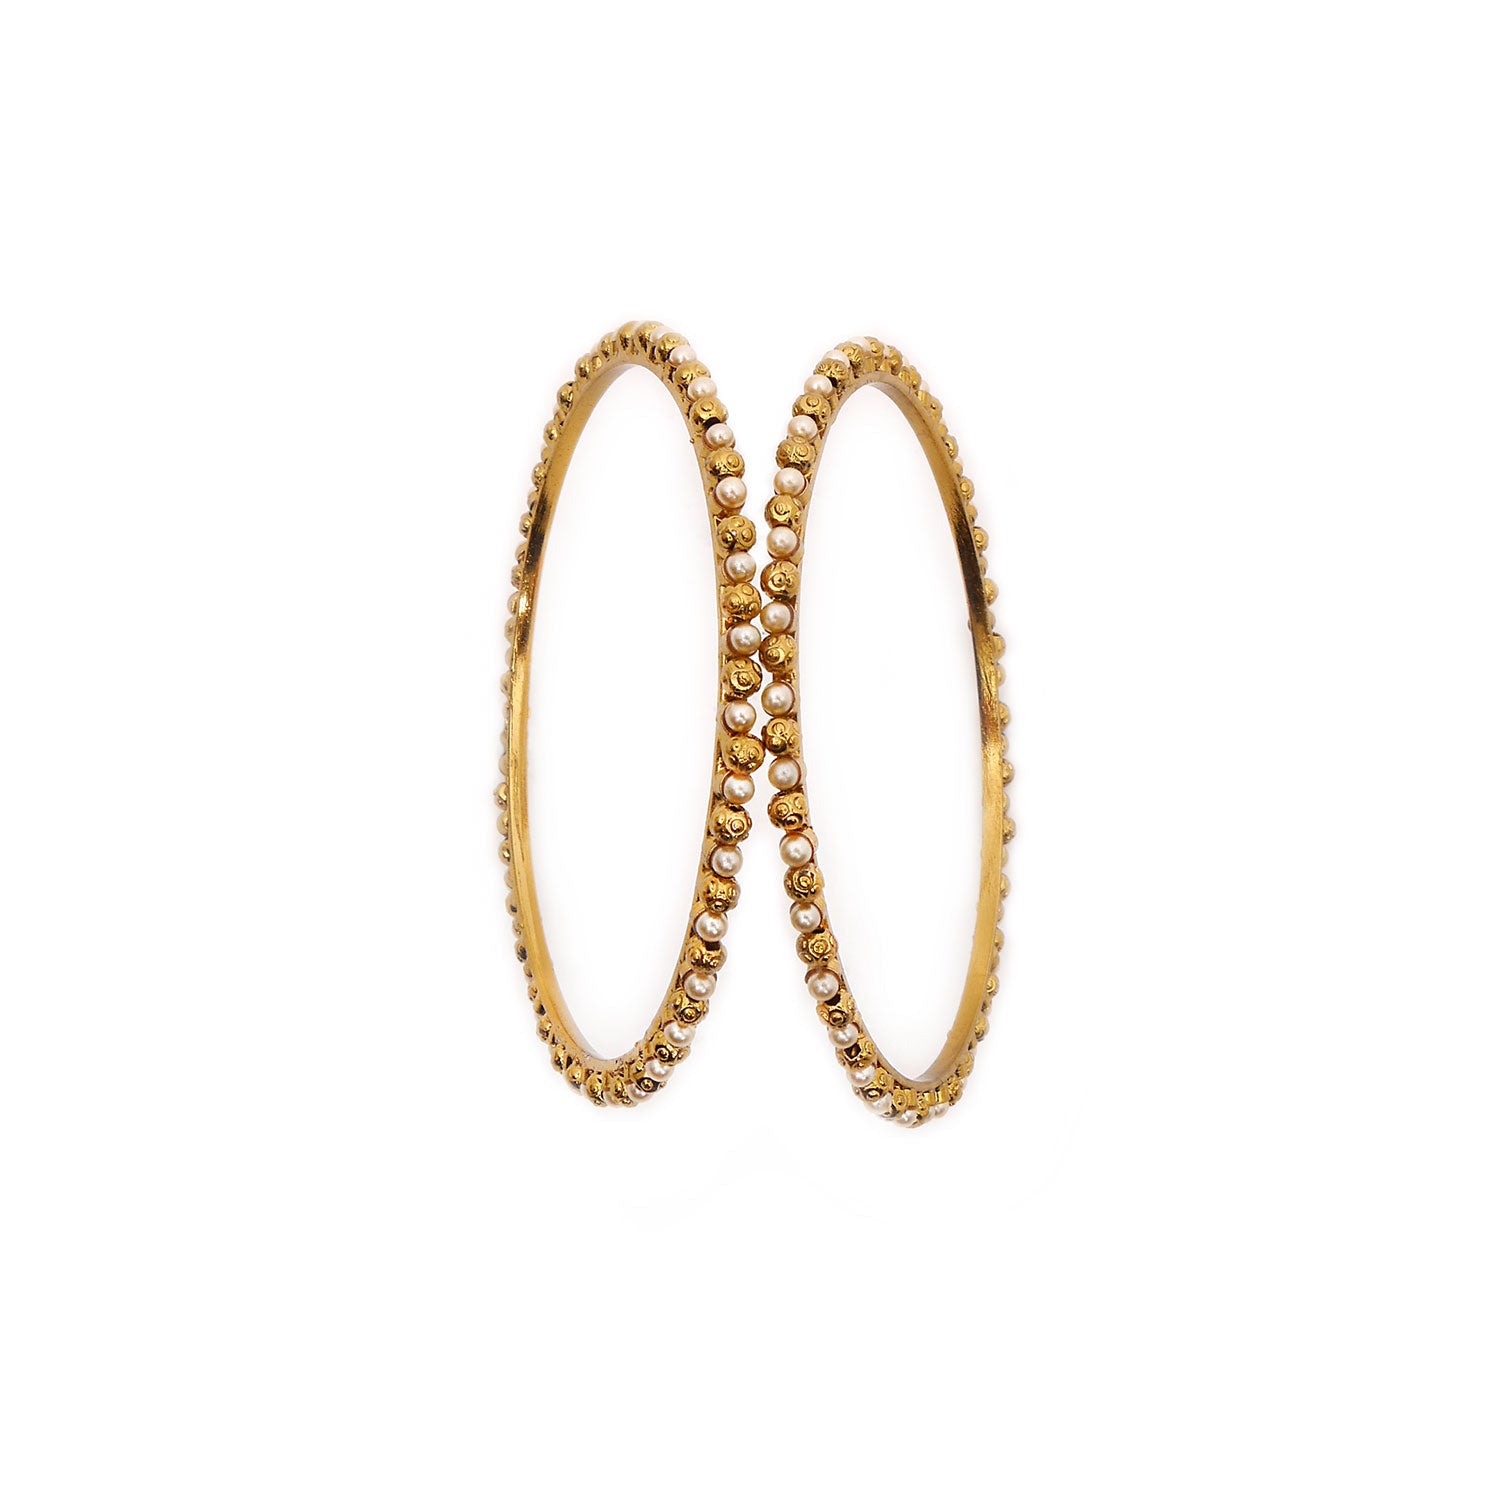 Facet Bead and Pearl Antique Bangles